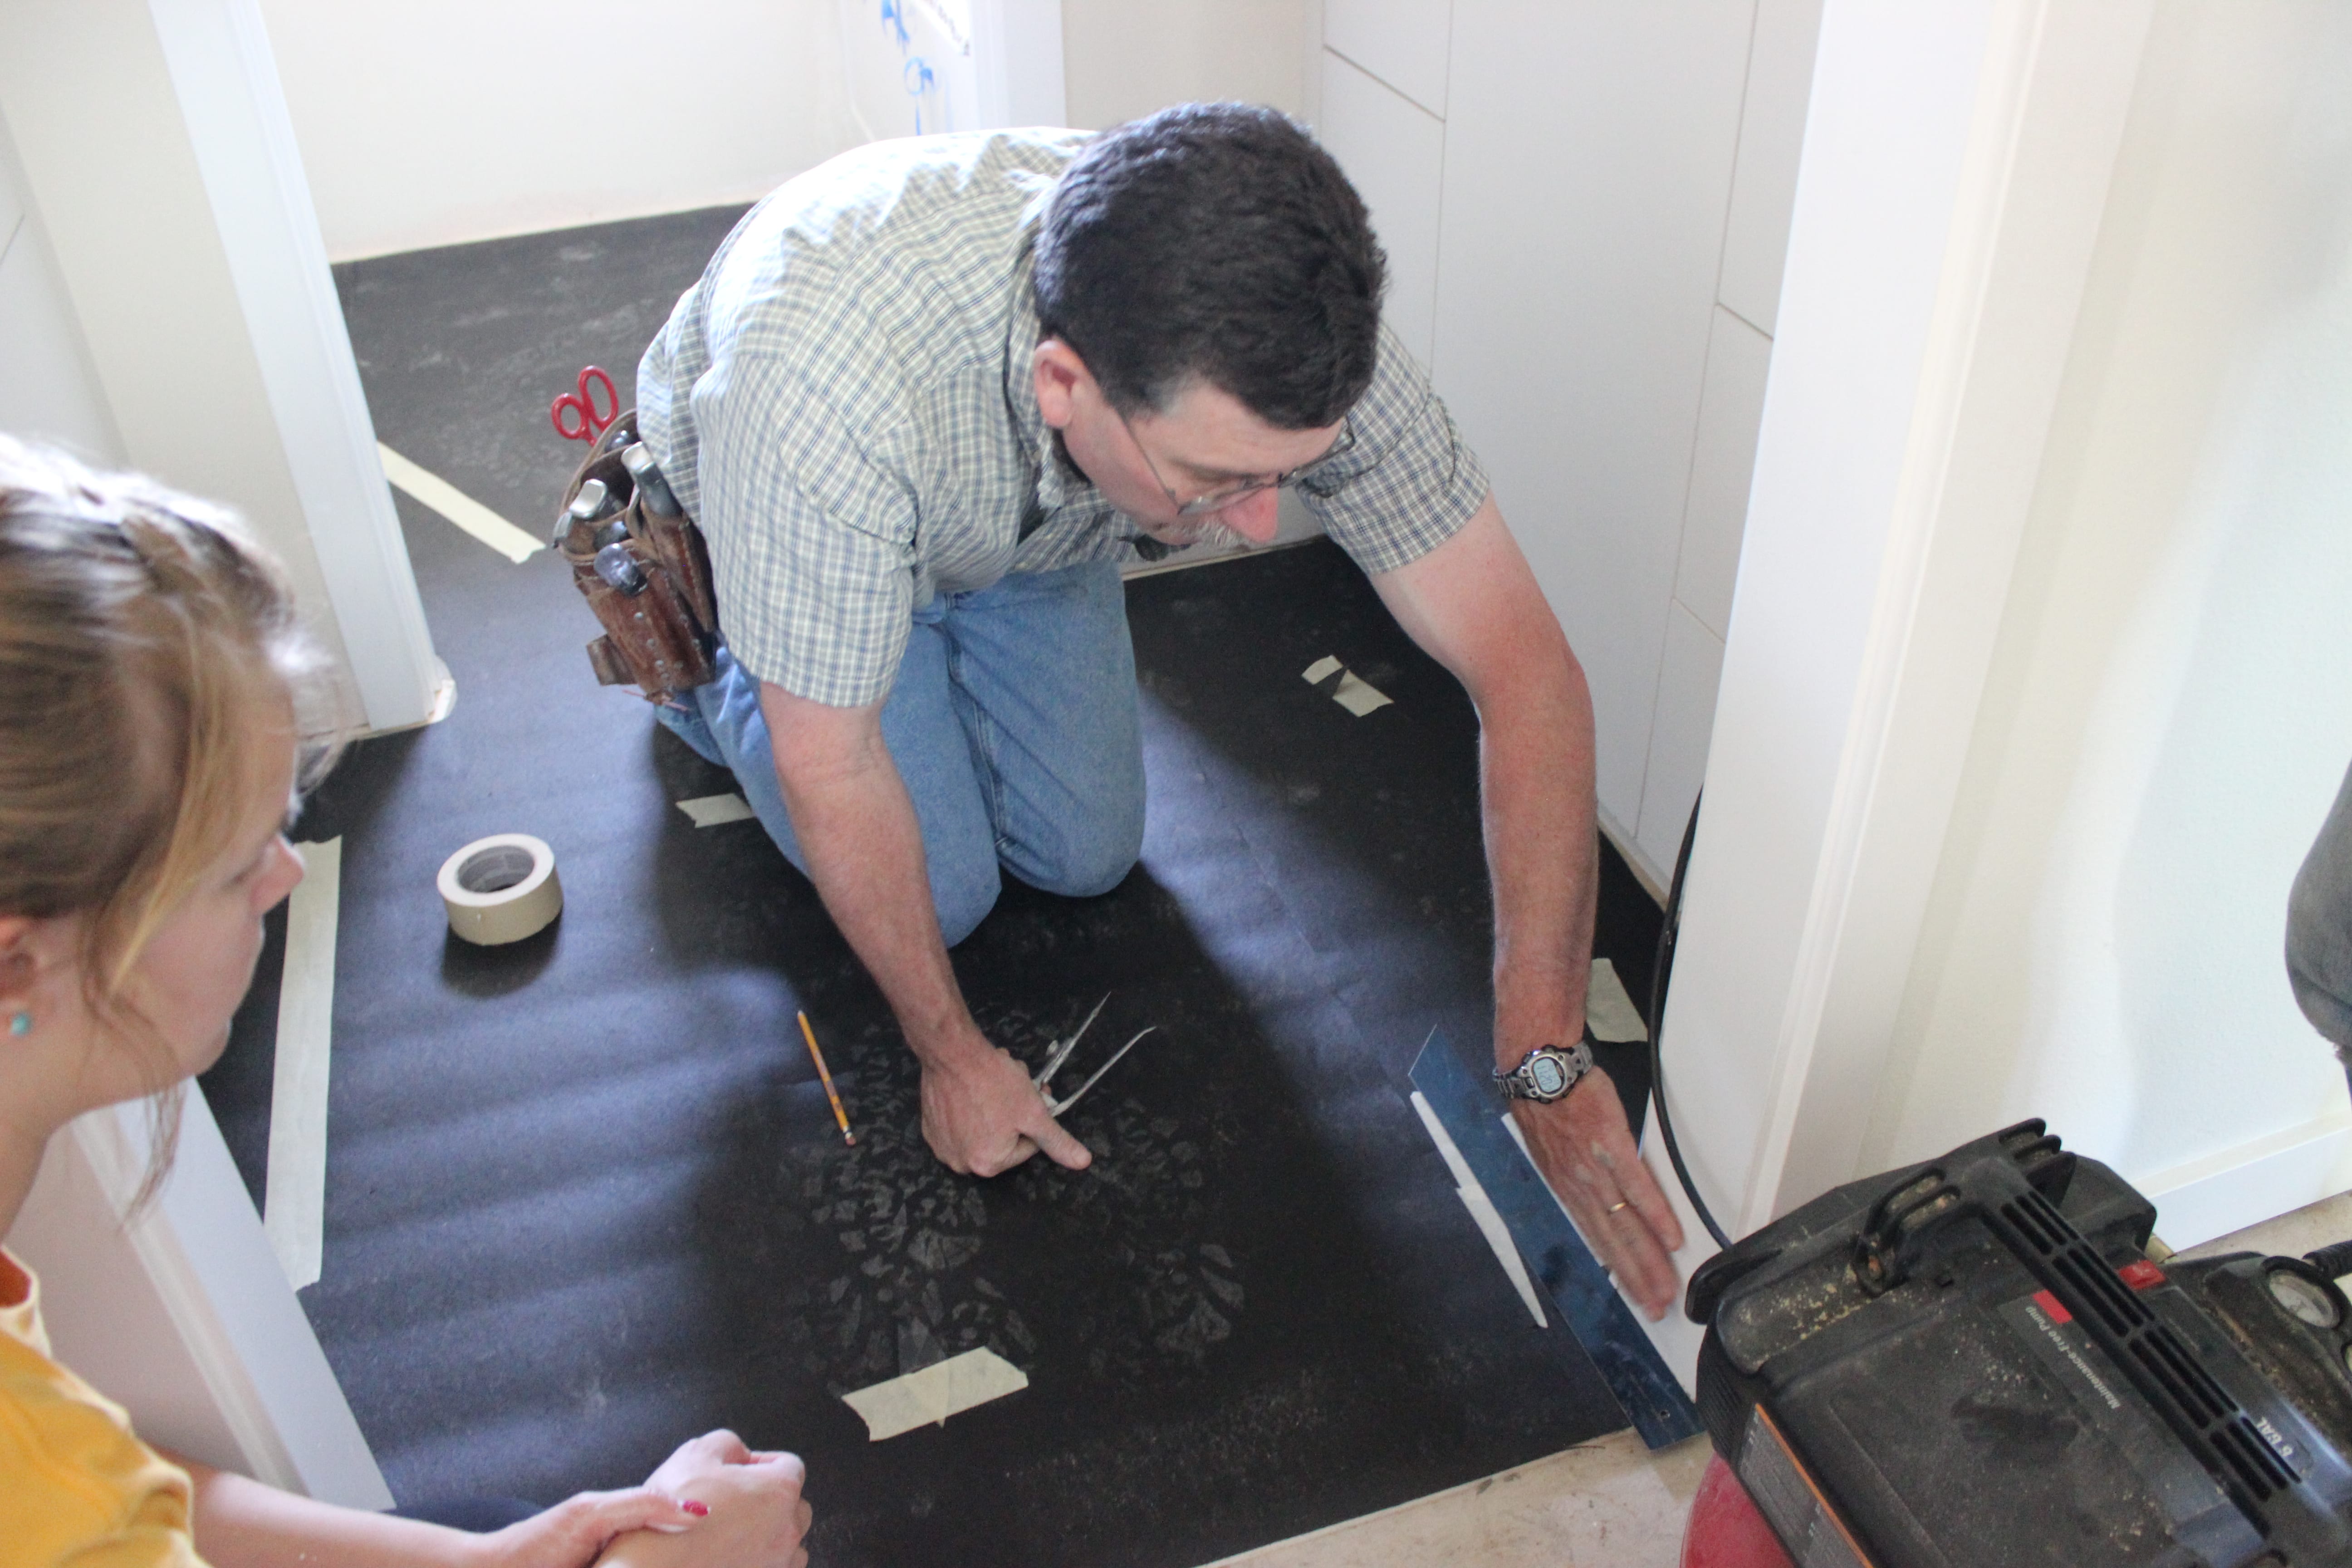 A specialist teaching us how to install linoleum